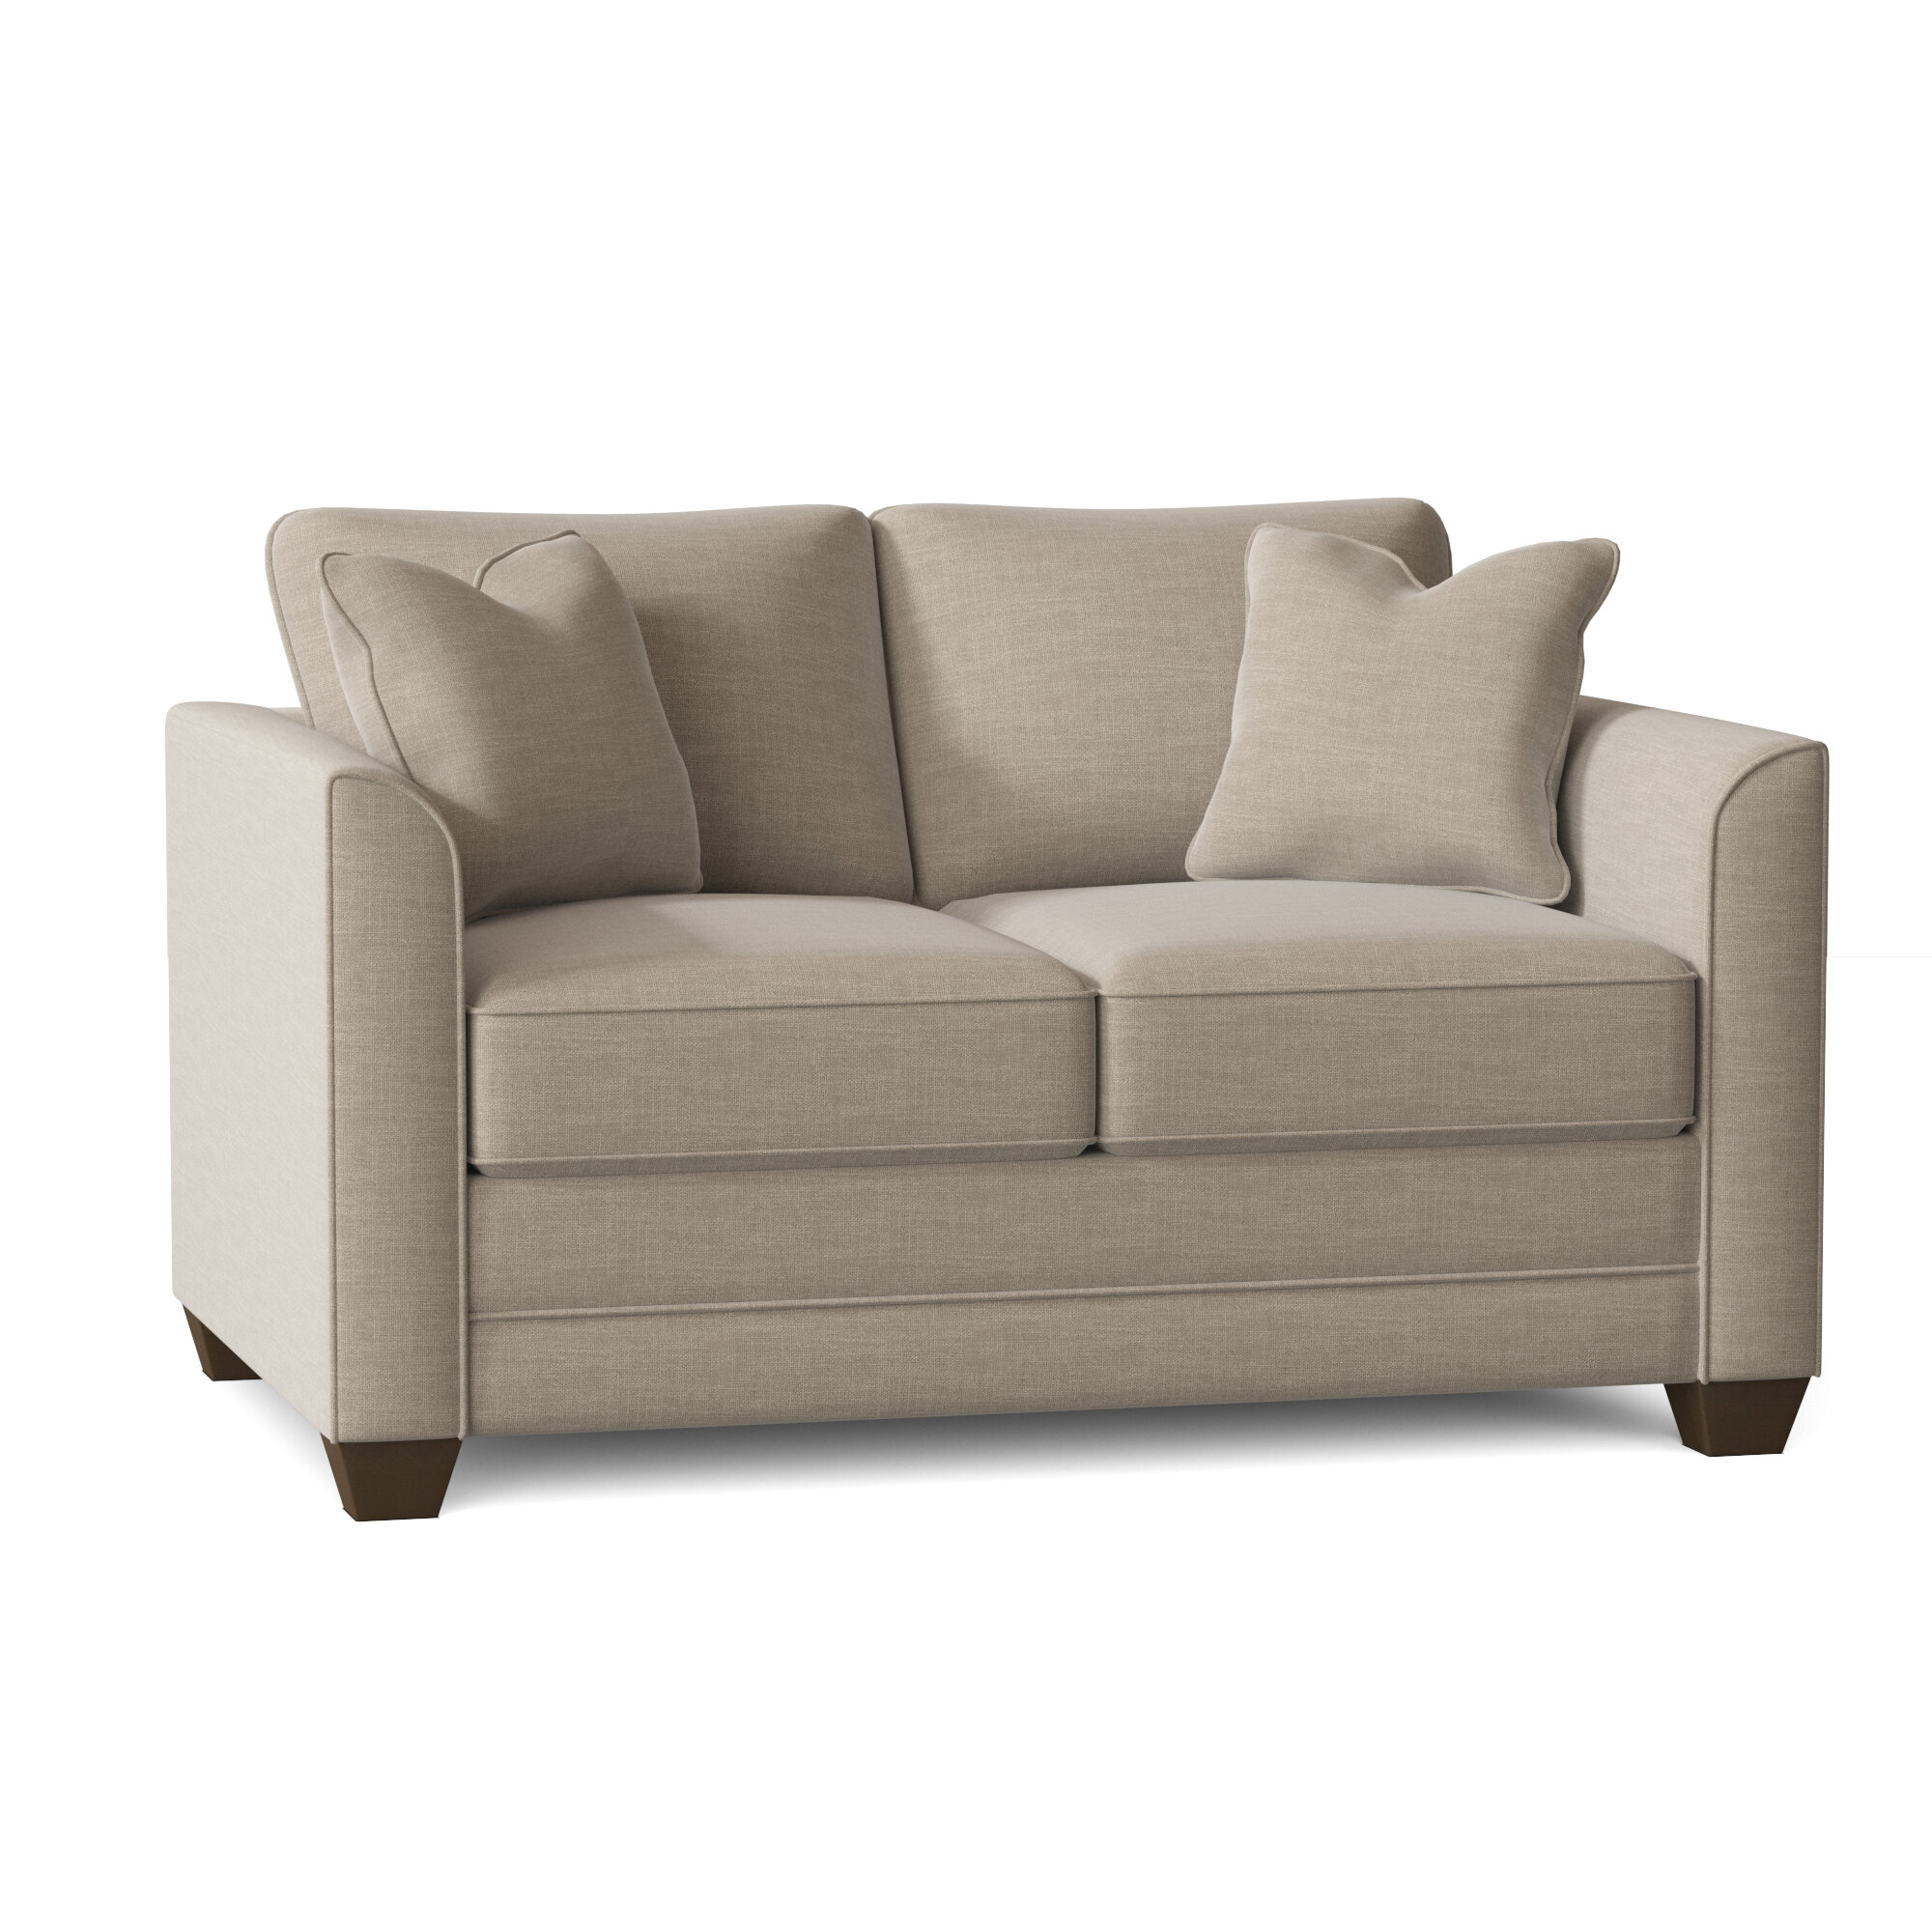 Lourenco 55” Flared Arm Loveseat with Reversible Cushions